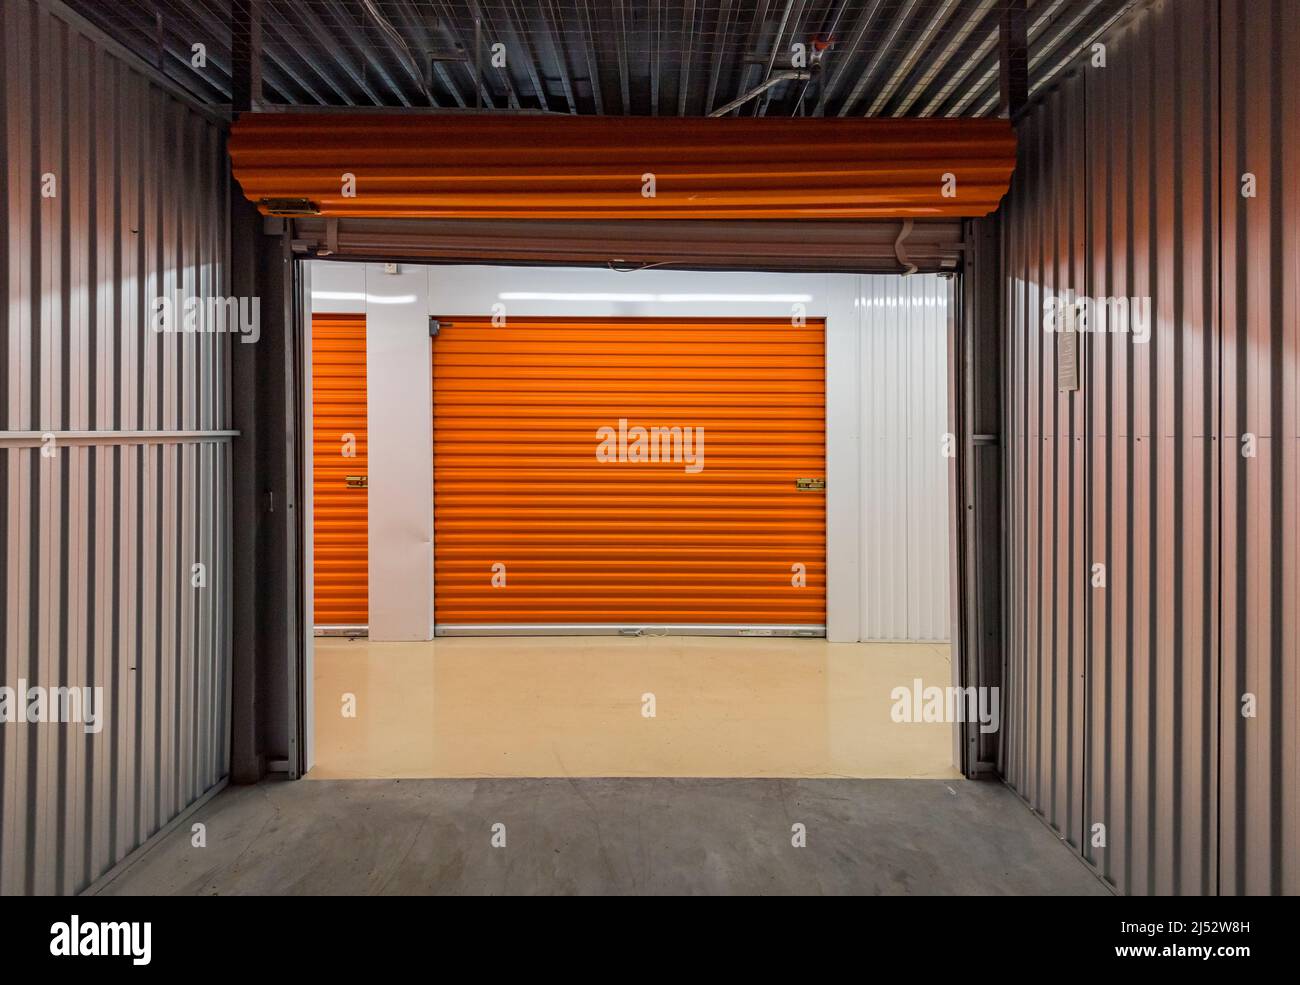 Empty self storage unit as seen from inside looking out Stock Photo